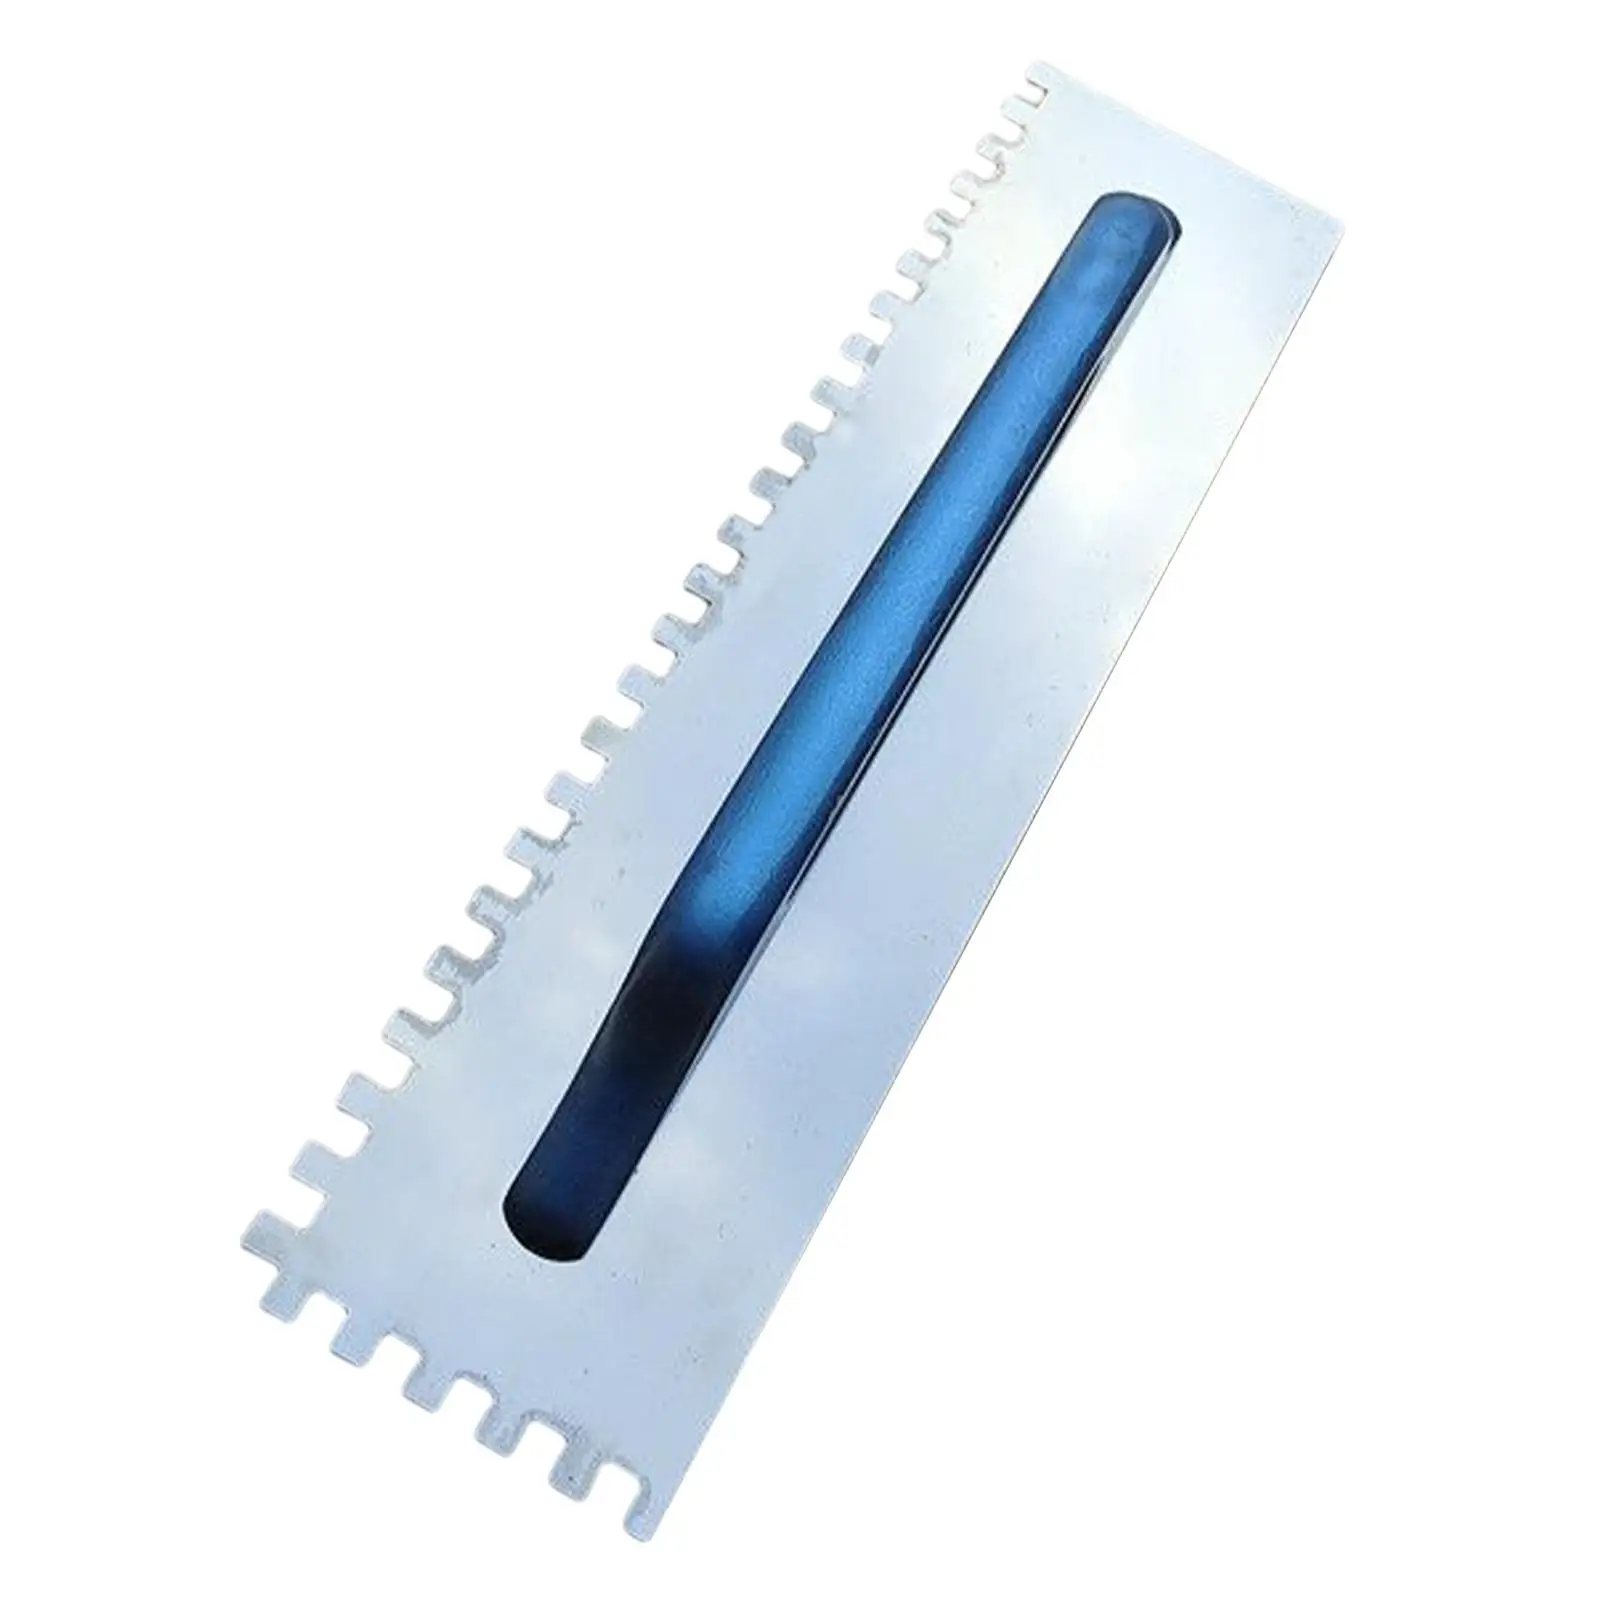 Drywall Smoothing Tool Plastering Skimming Trowel Tile Construction Tool